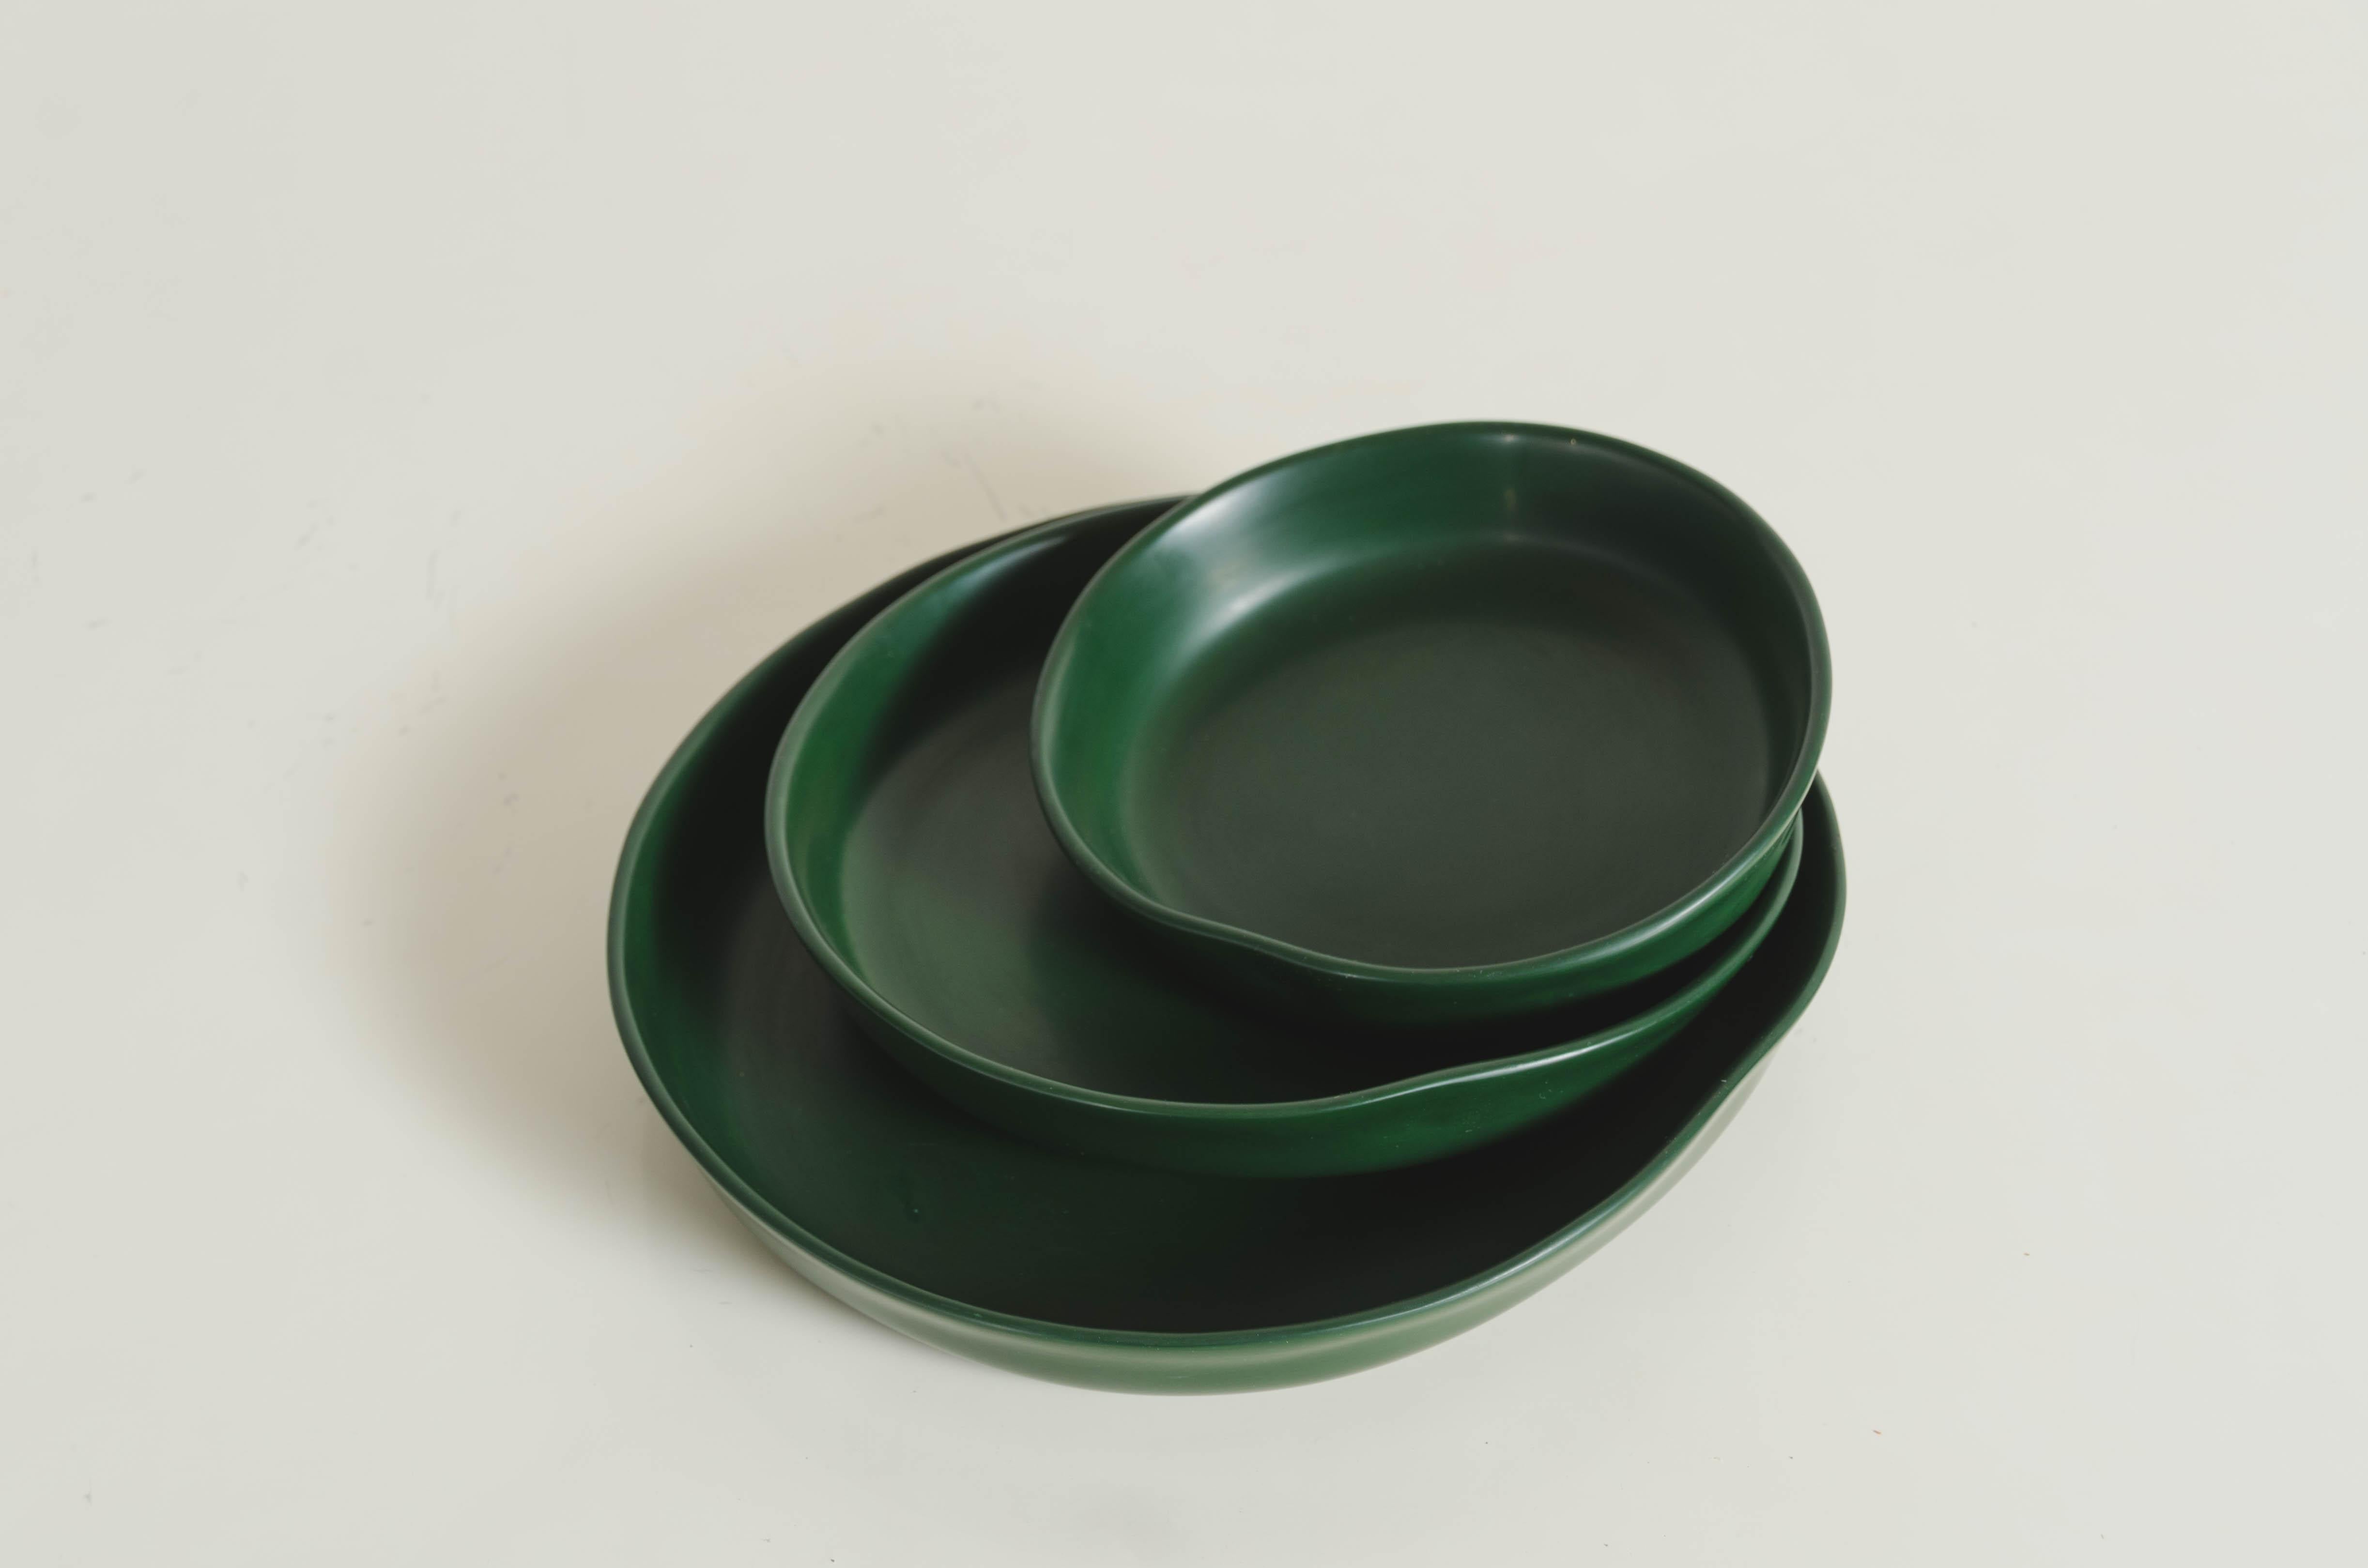 Round Plates, Set of 3, Green Lacquer by Robert Kuo, Handmade, Limited Edition In New Condition For Sale In Los Angeles, CA